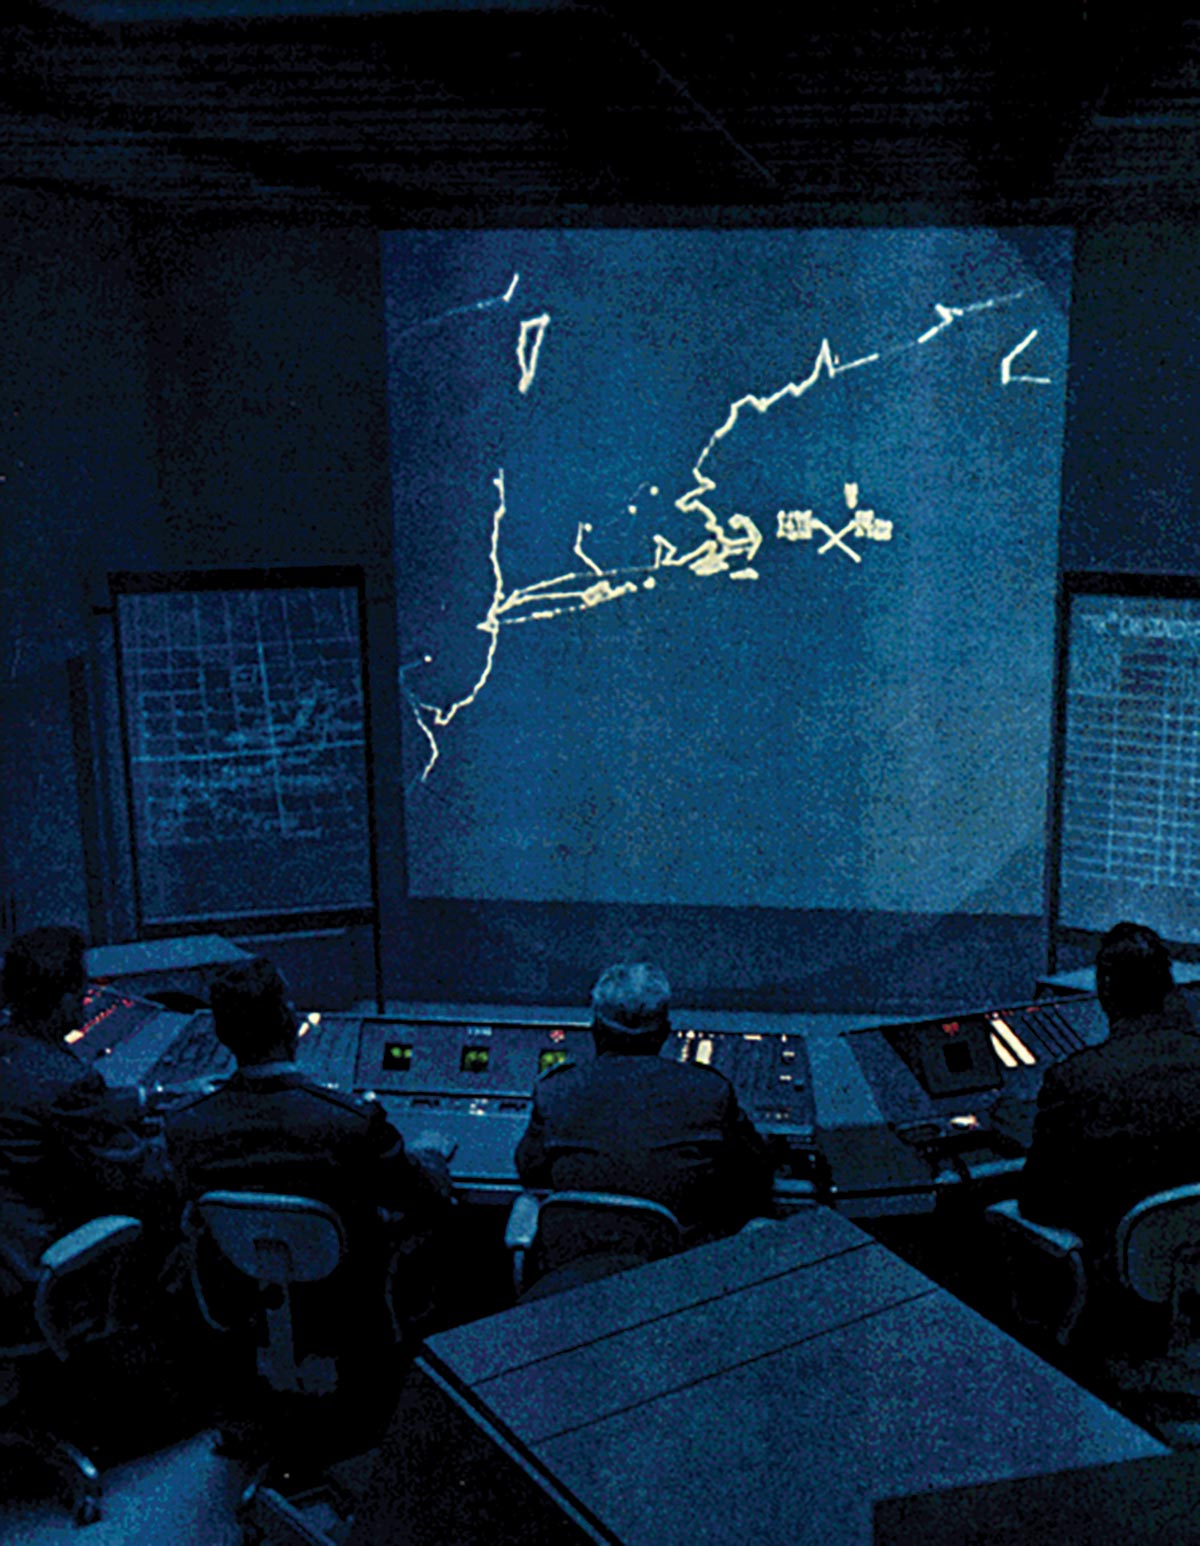 An image of Cape Cod, Massachusetts, is displayed on screen in a Semi-Automatic Ground Environment (SAGE) control room during the Cold War. SAGE provided the foundation for linking many computer systems. (Photo courtesy of the U.S. Air Force)